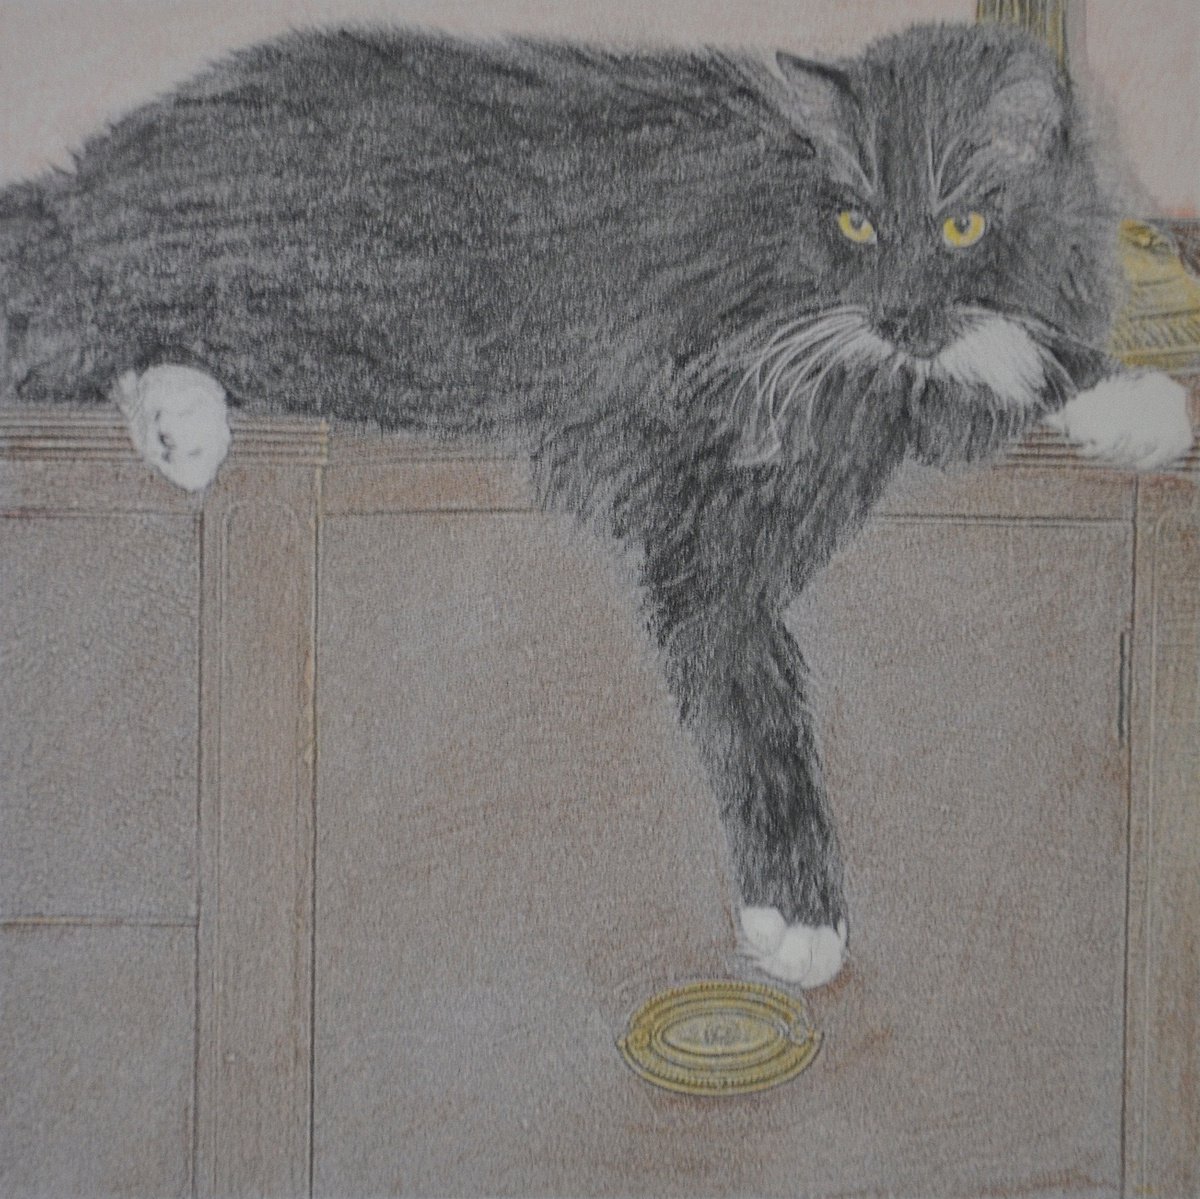 Samson on The Sideboard by Linda Southworth